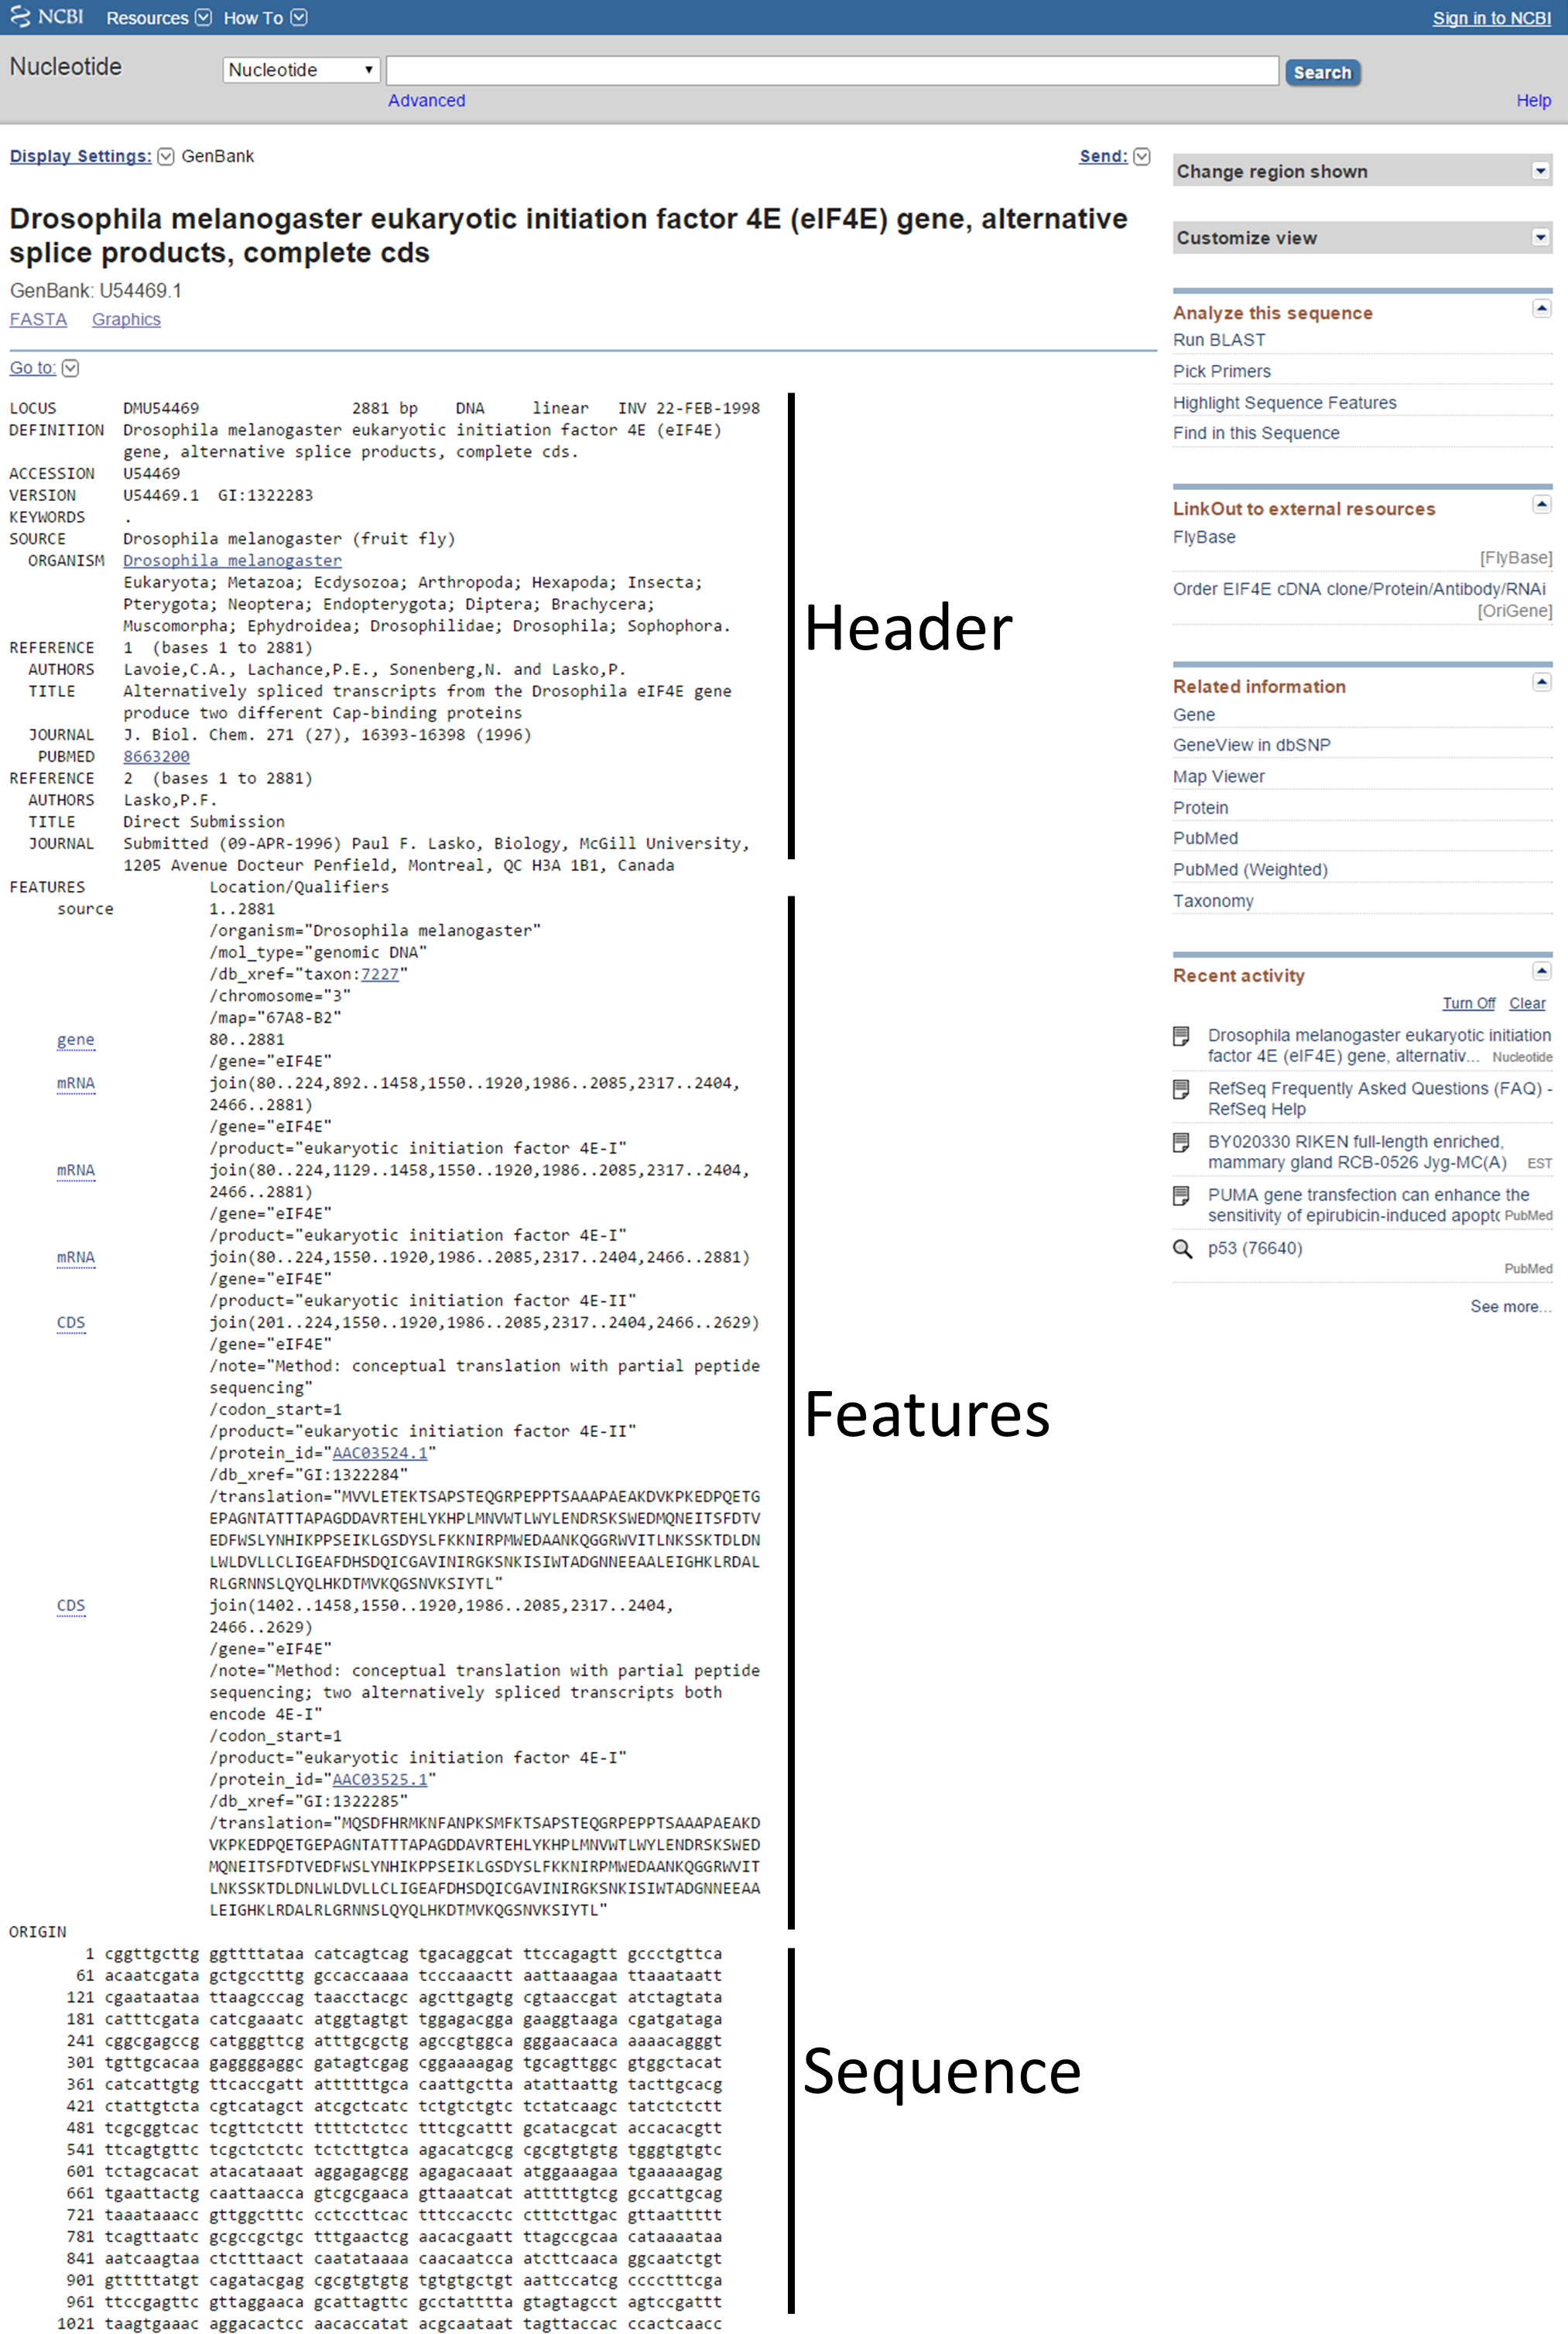 Overview of search record in the Nucleotide database with three sections from GenBank format